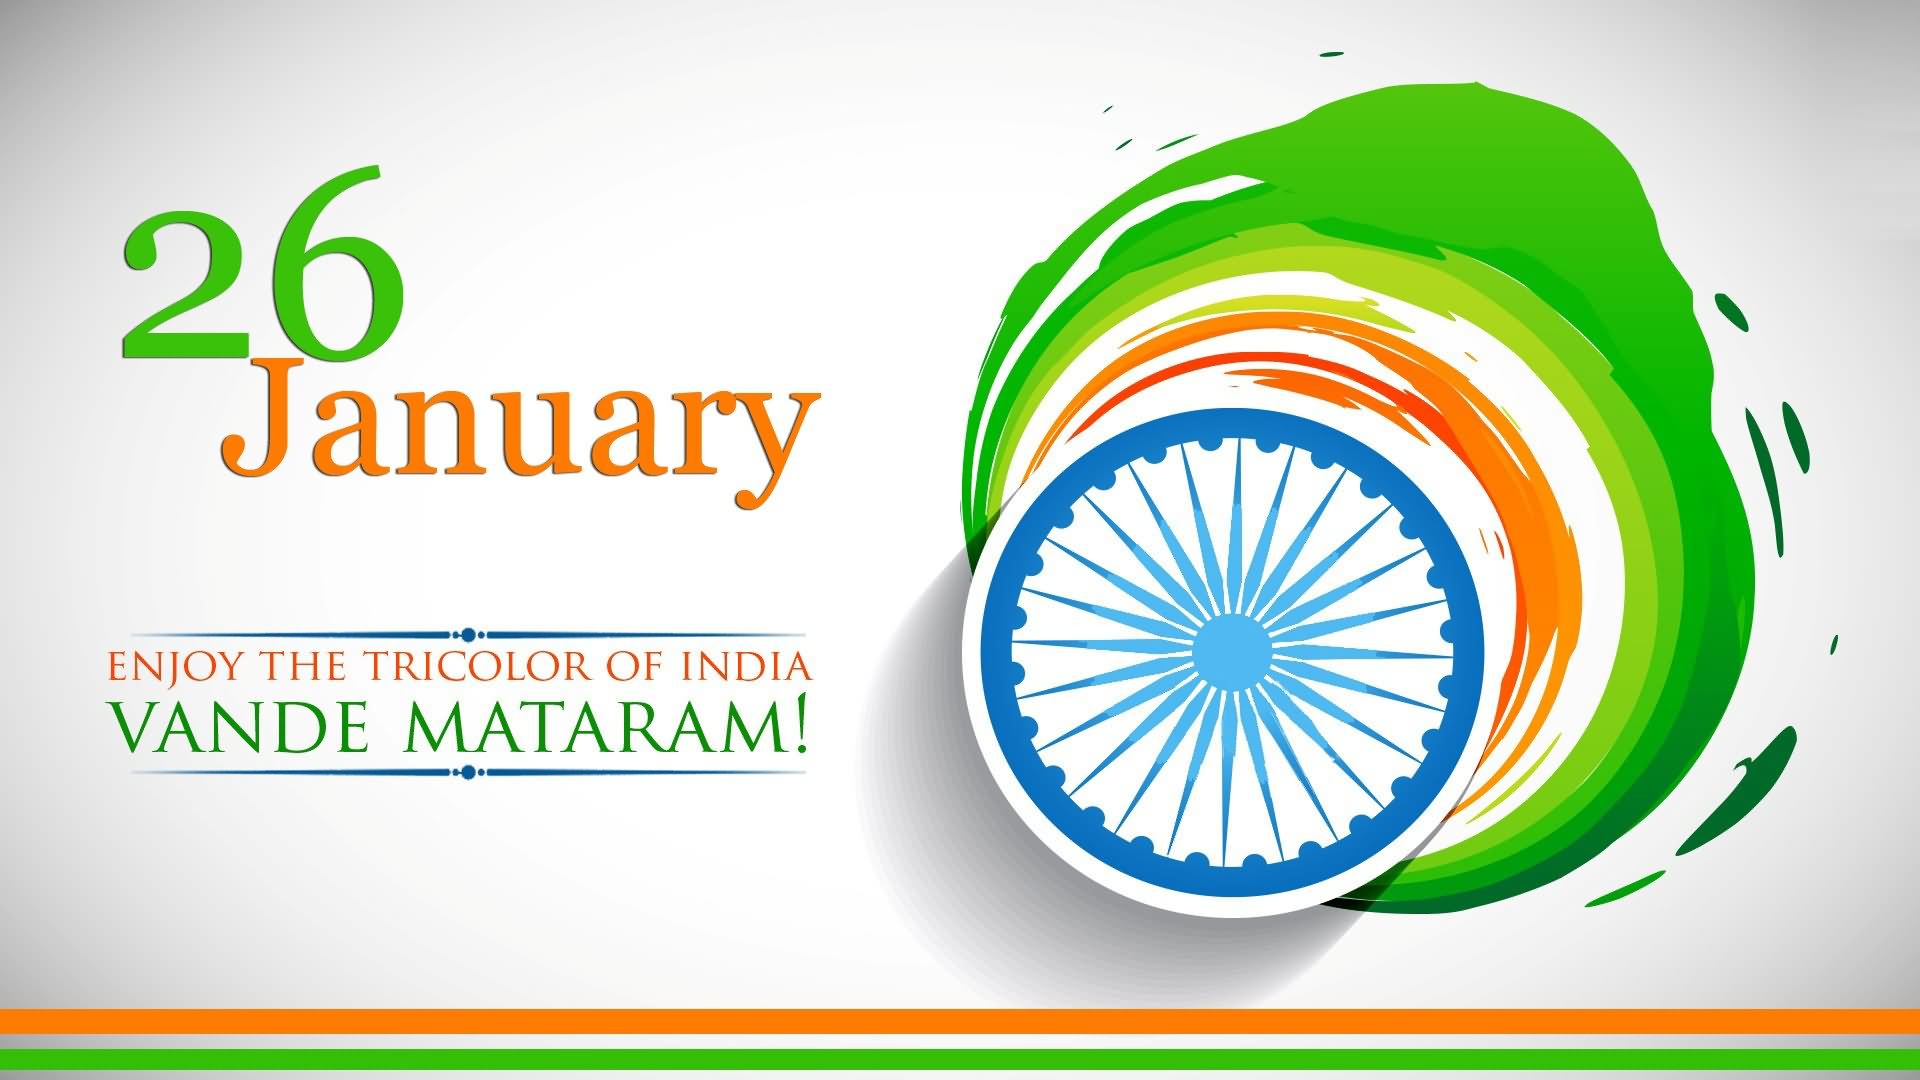 45 Best Republic Day Wallpapers